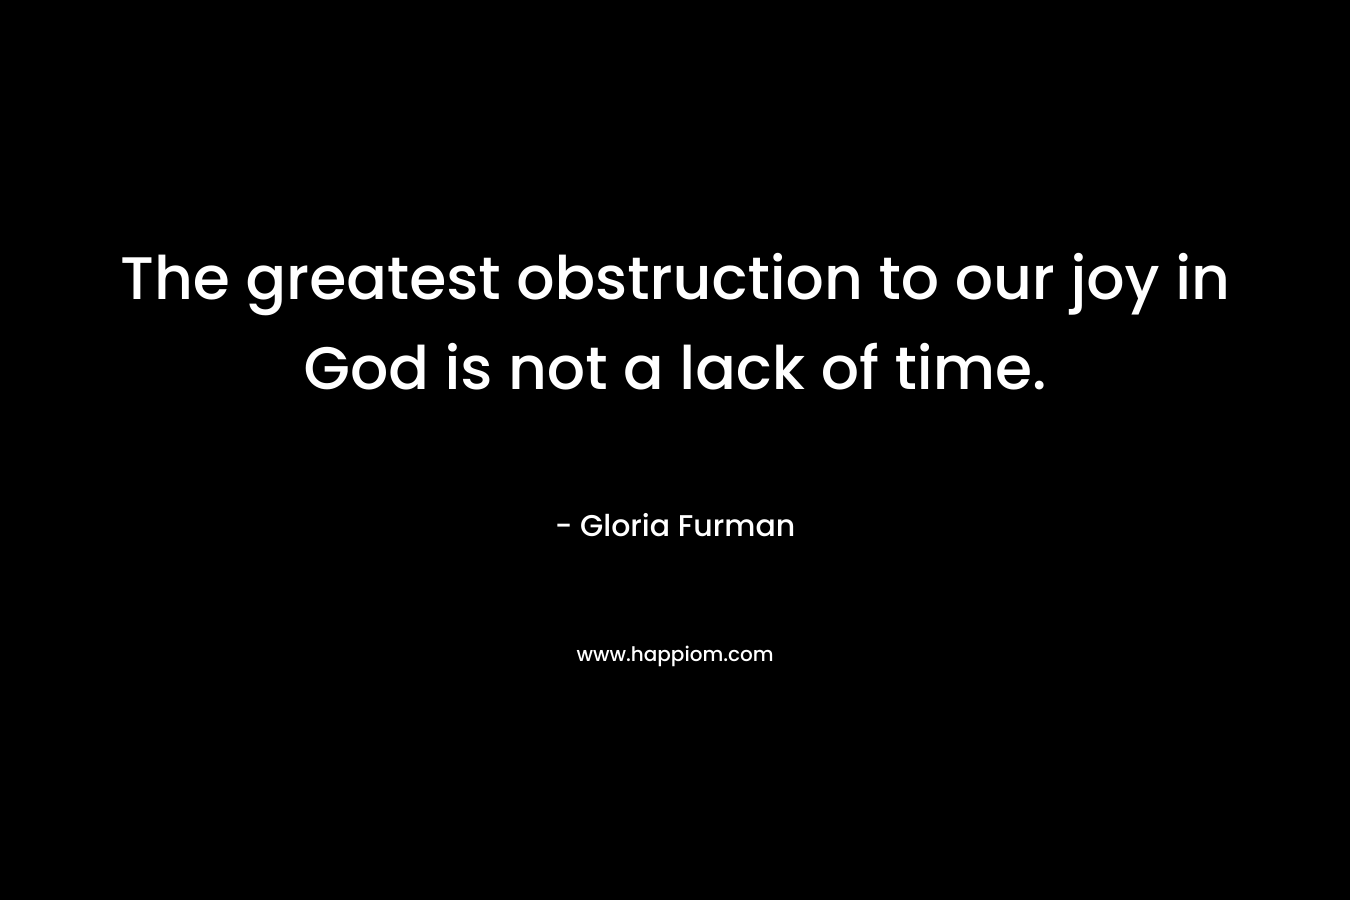 The greatest obstruction to our joy in God is not a lack of time. – Gloria Furman